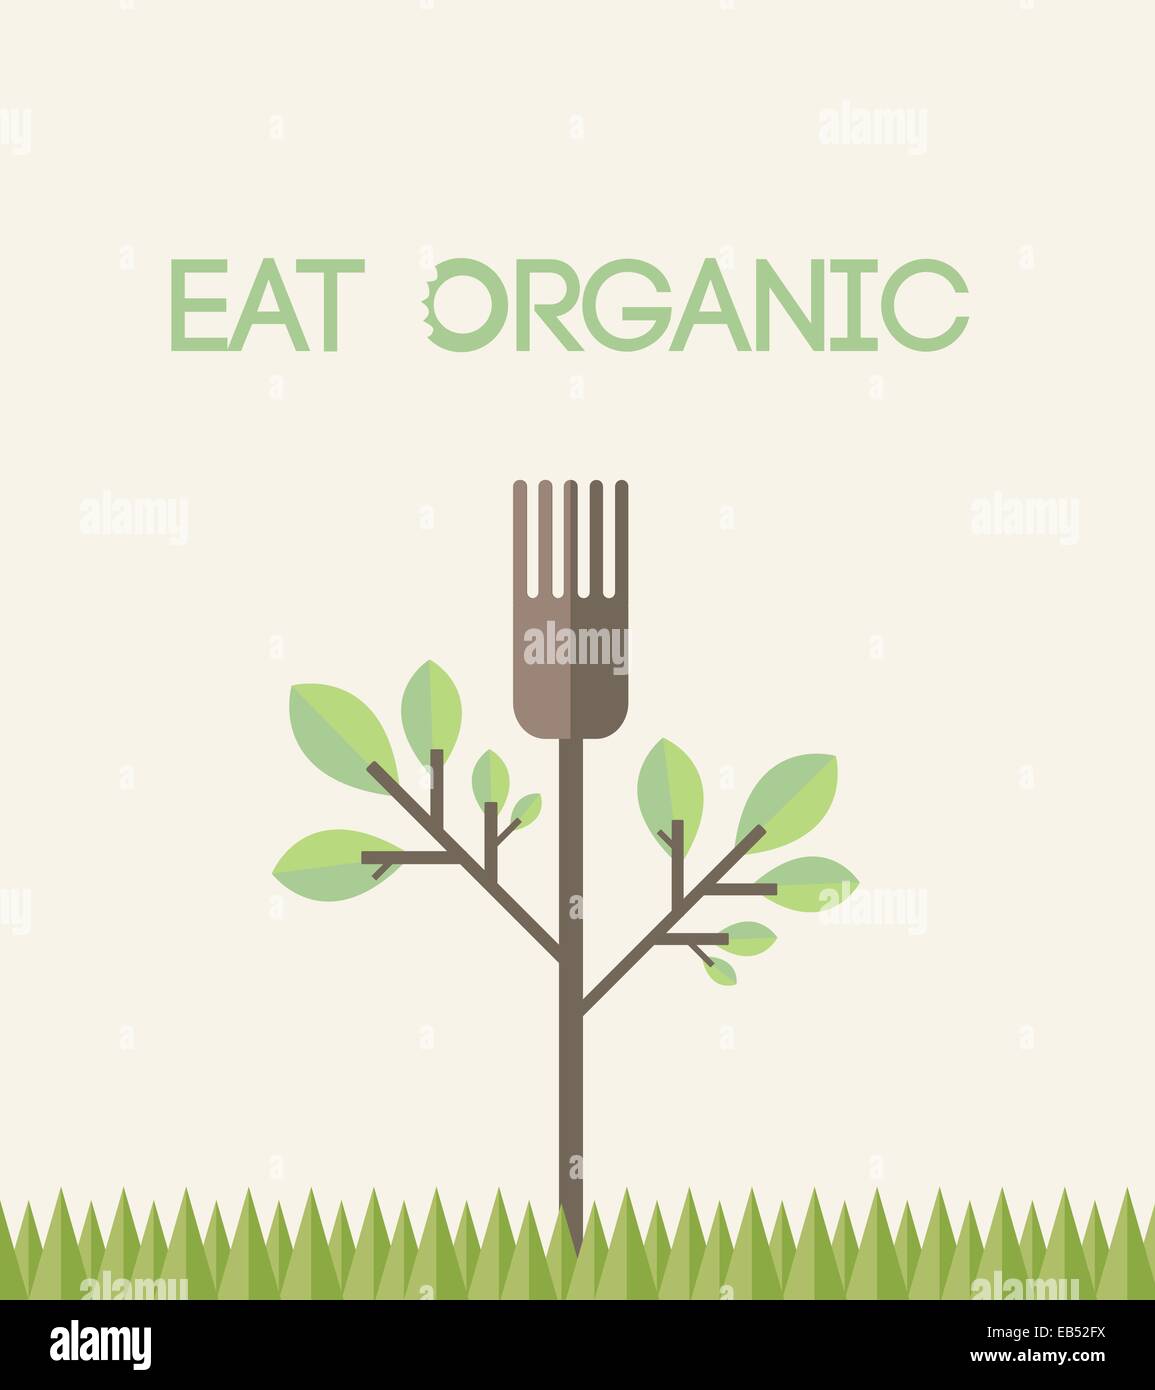 Eat organic vector with text Stock Vector